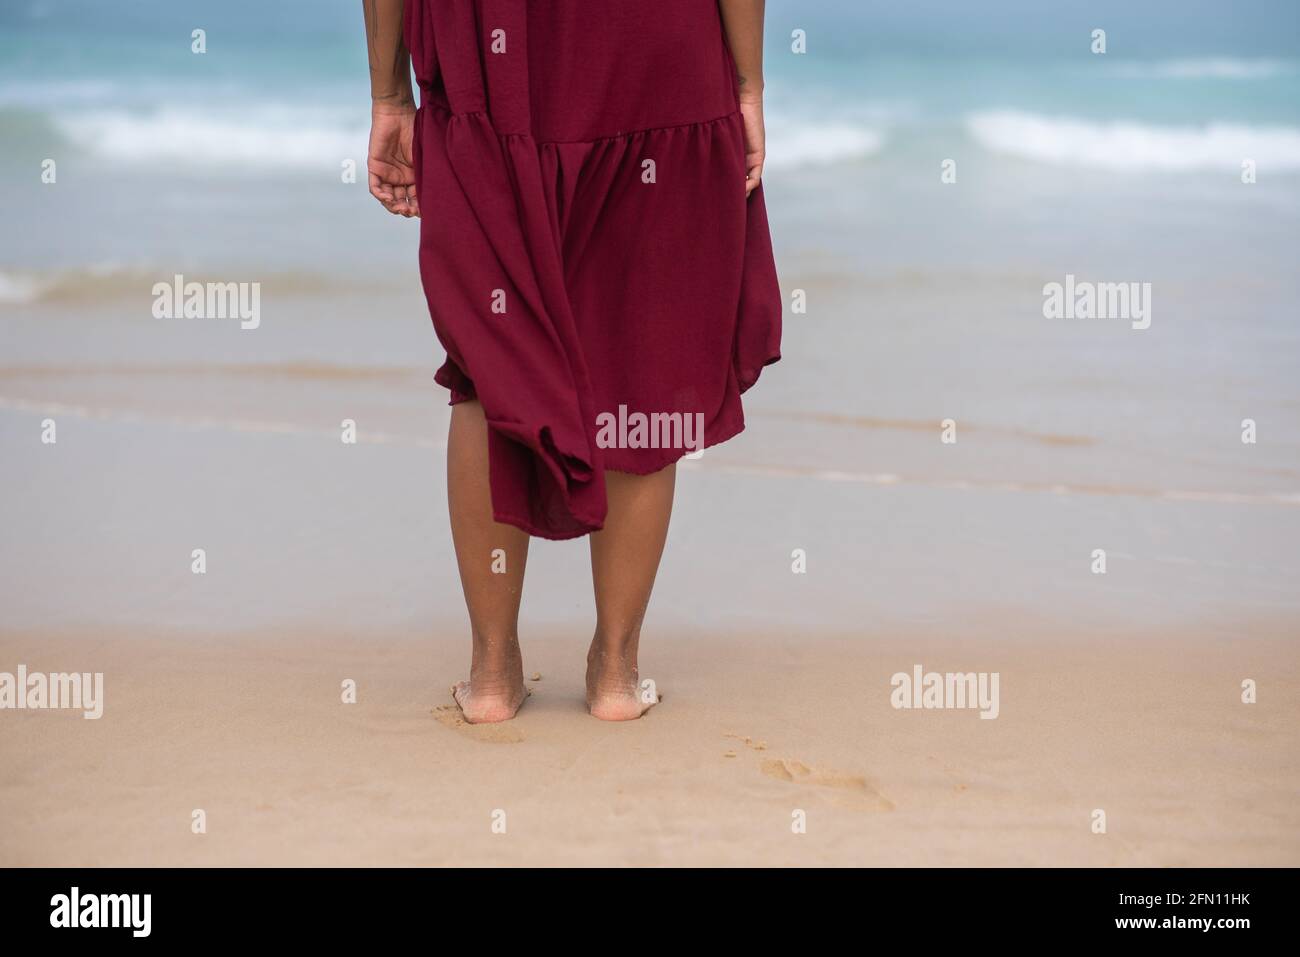 Woman seen standing with water from ocean in background Stock Photo